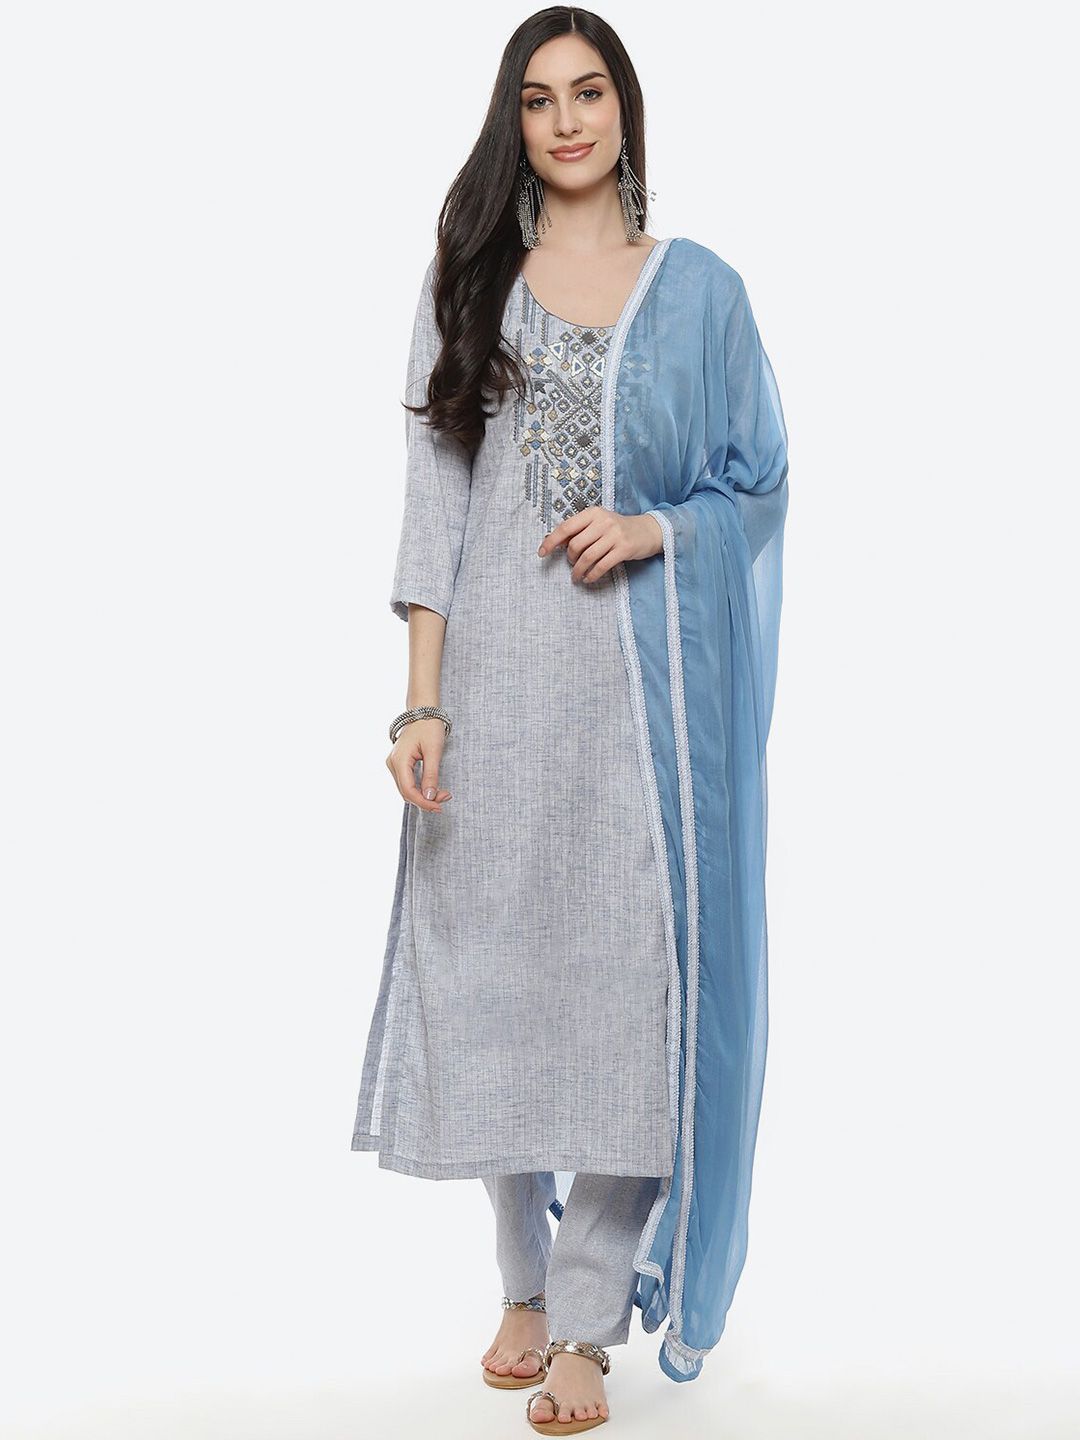 Biba Blue & Grey Embroidered Pure Cotton Unstitched Dress Material Price in India